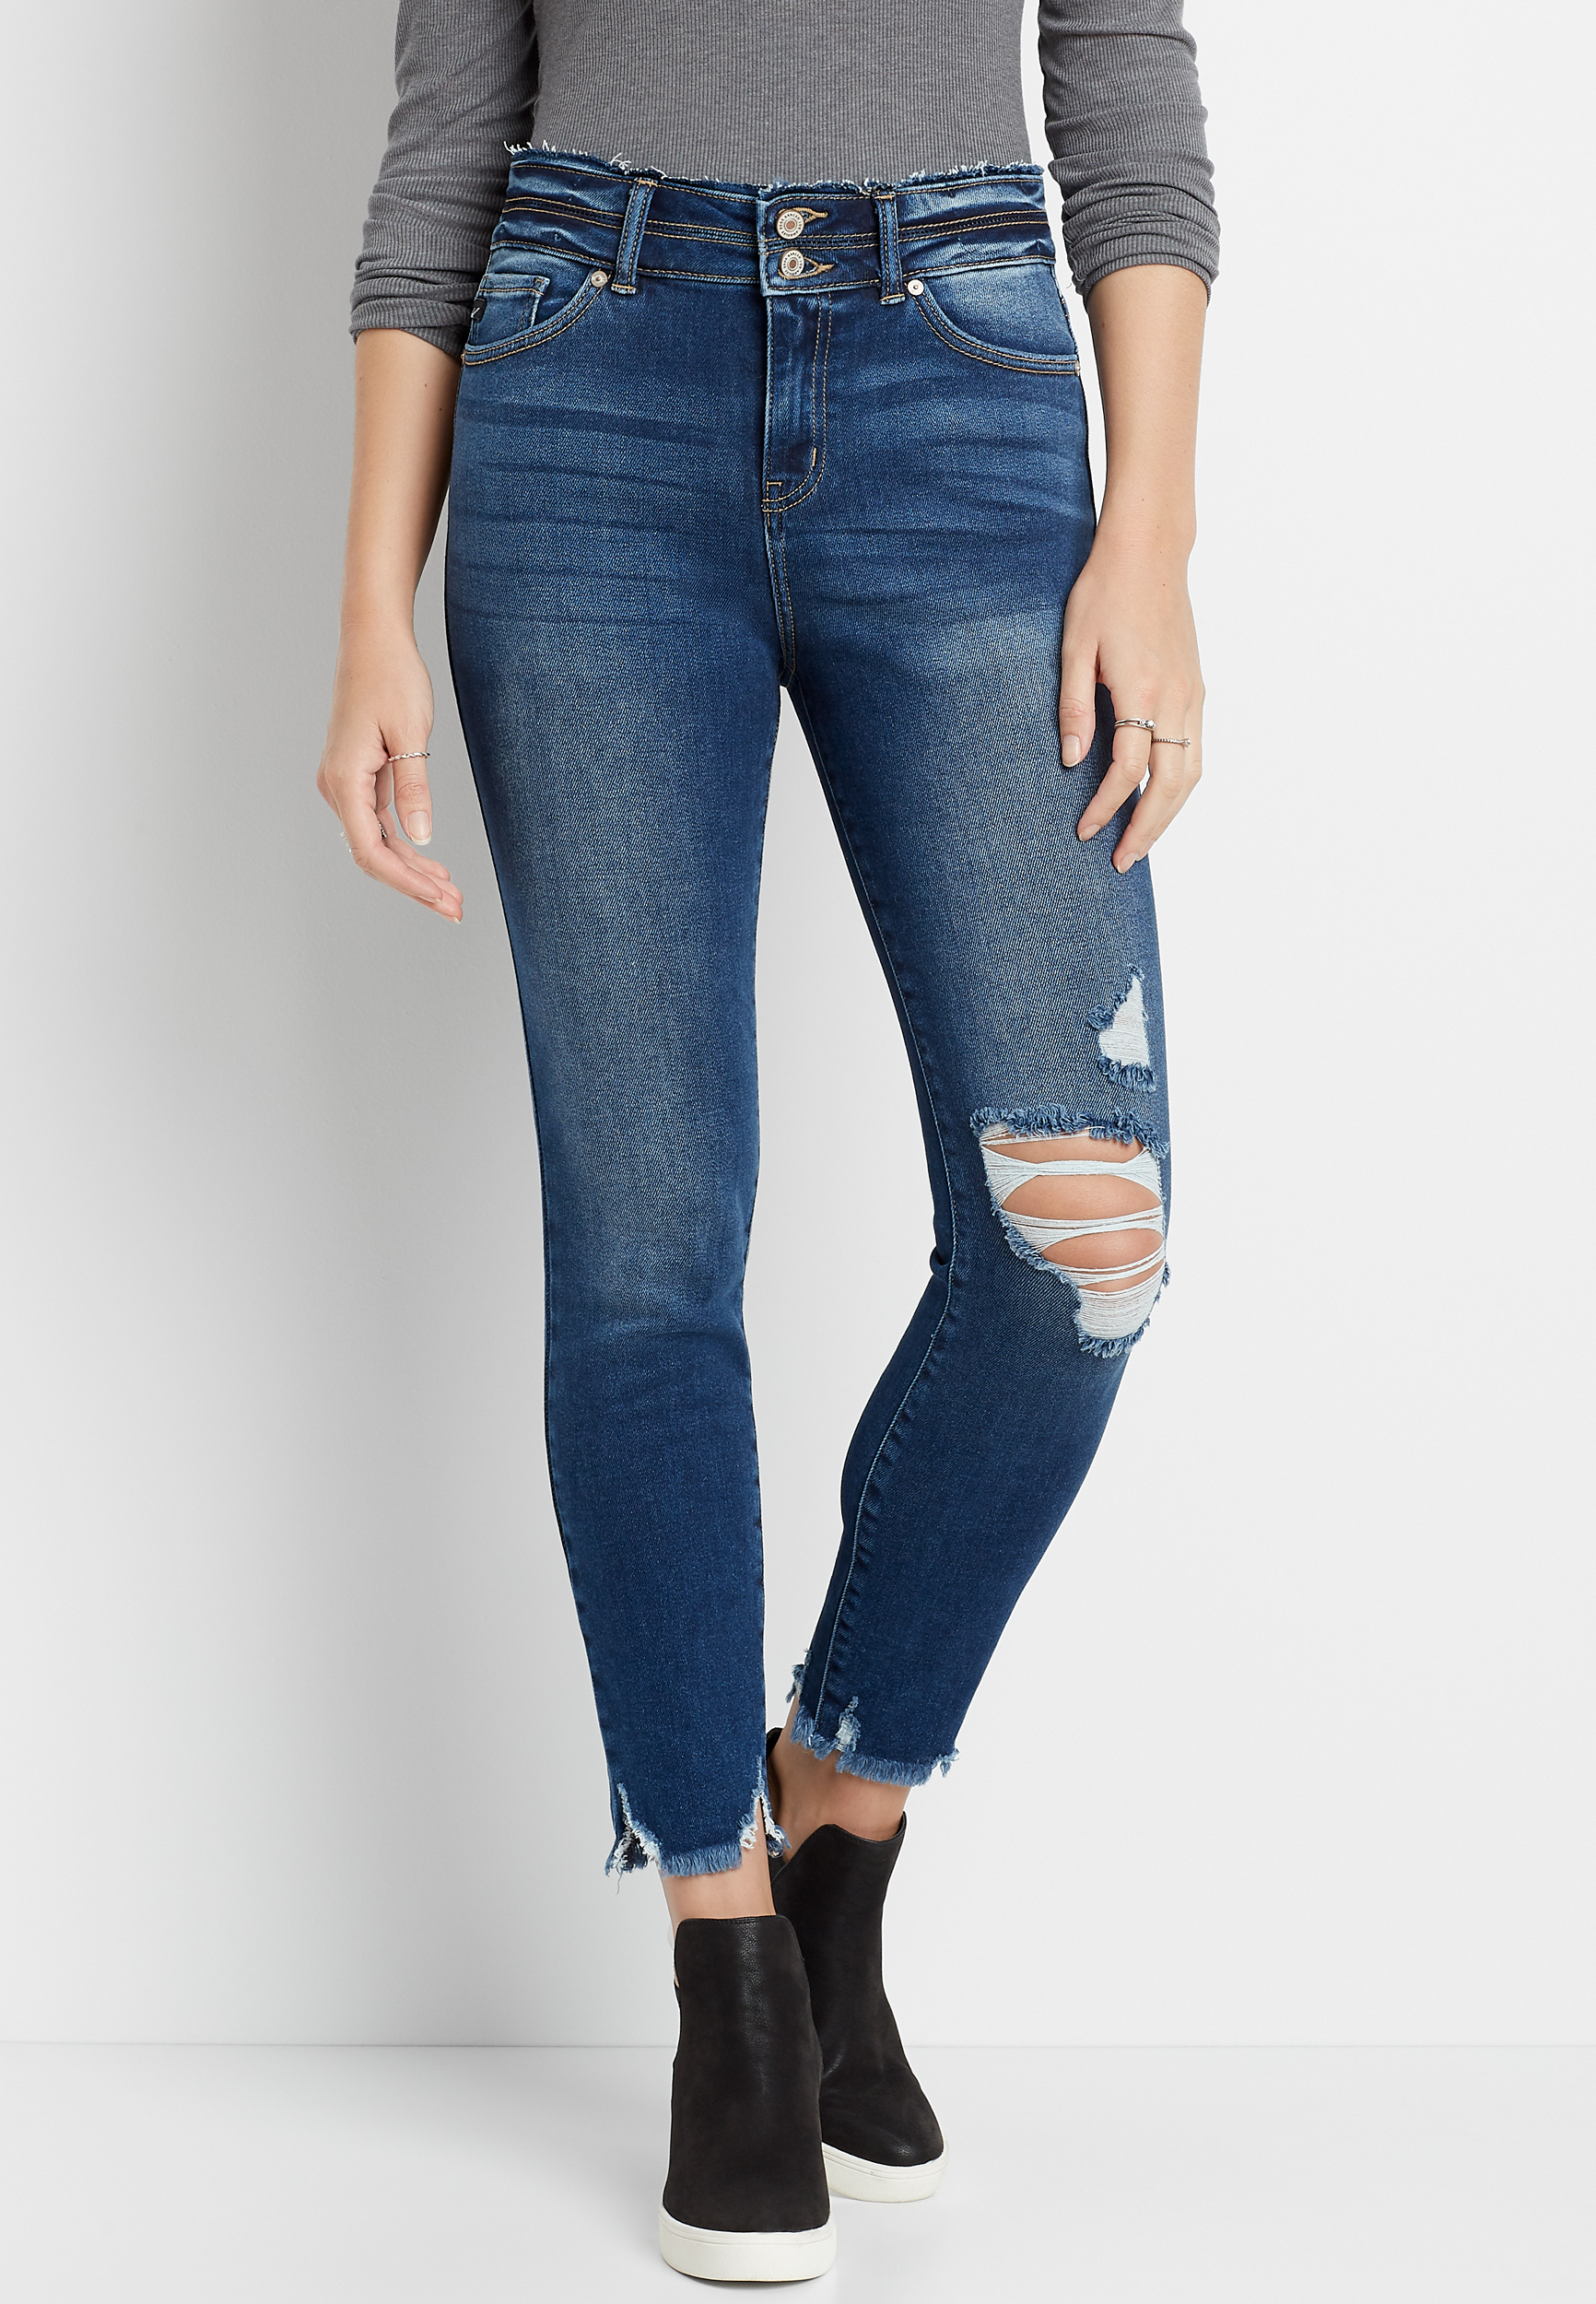 KanCan™ High Rise Destructed Stacked Waist Skinny Ankle Jean | maurices